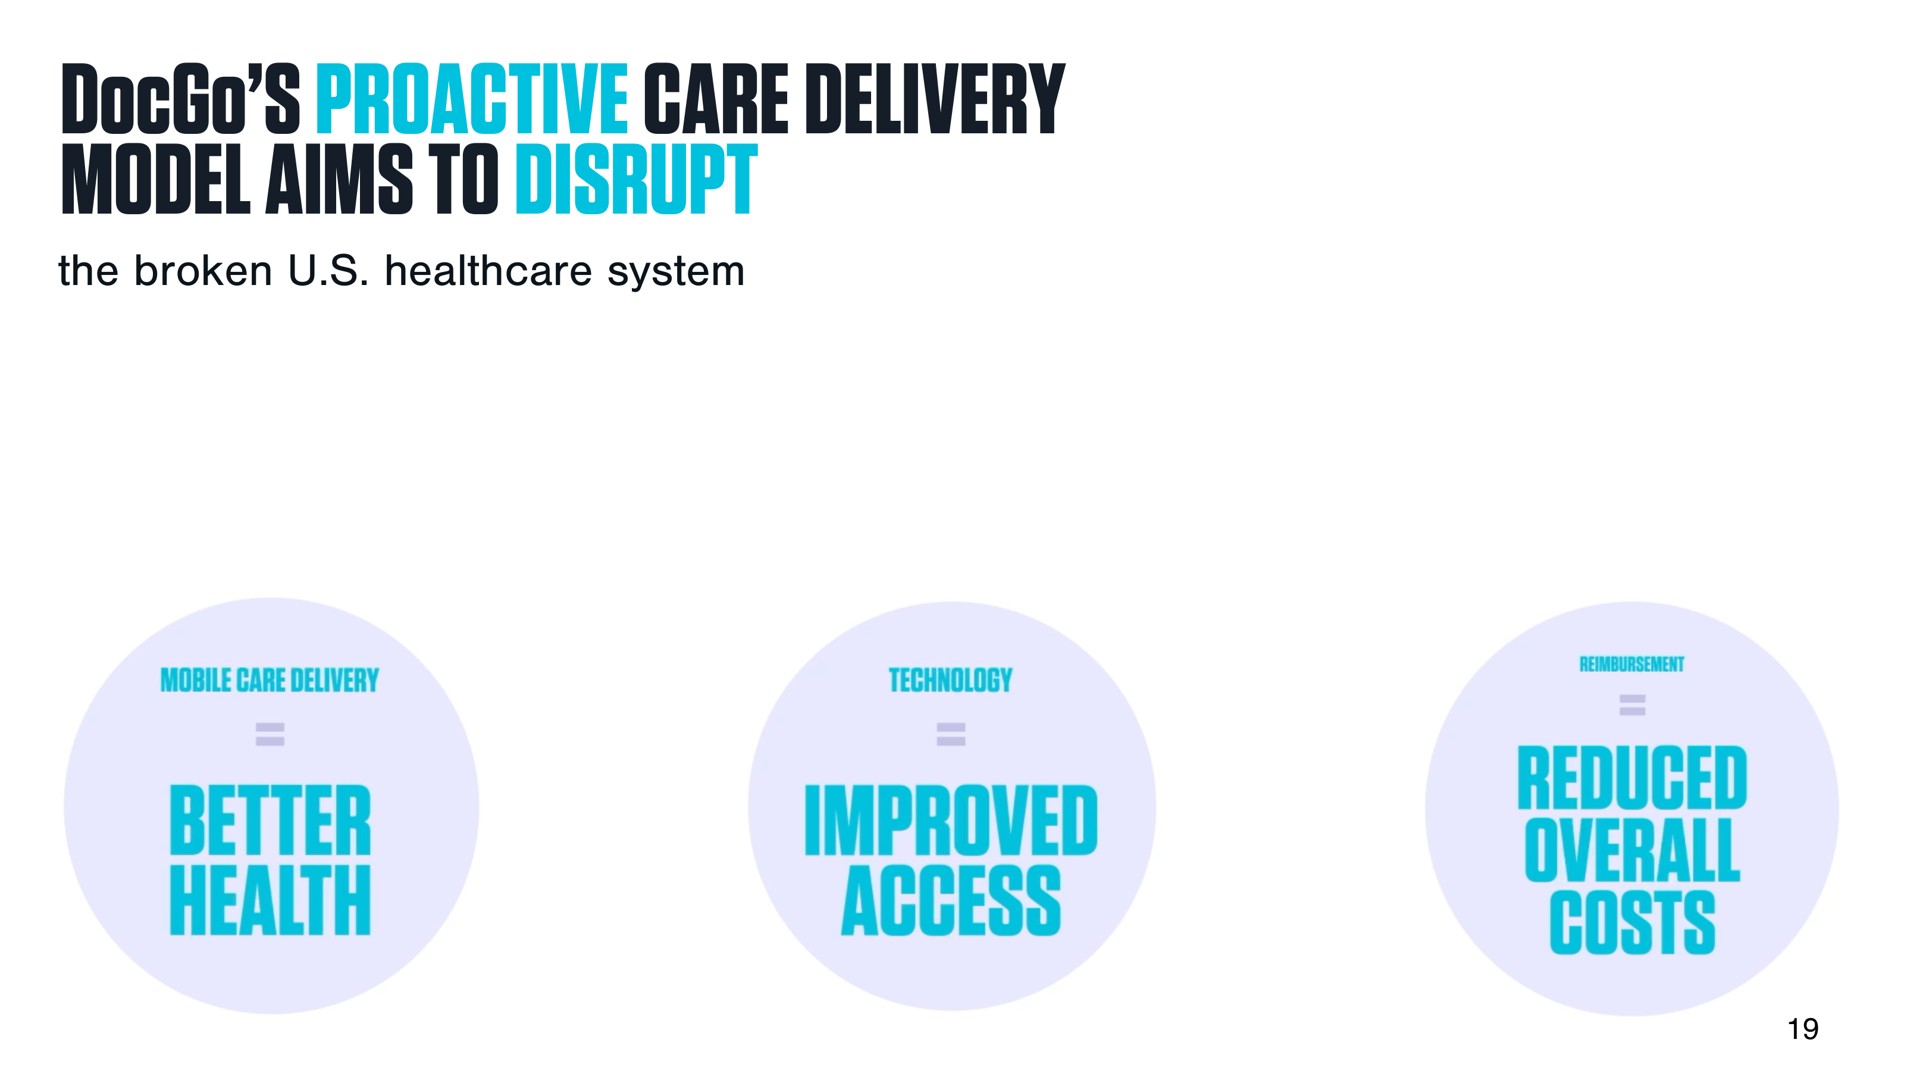 gare delivery model aims to disrupt the broken system better health improved access reduced costs | DocGo